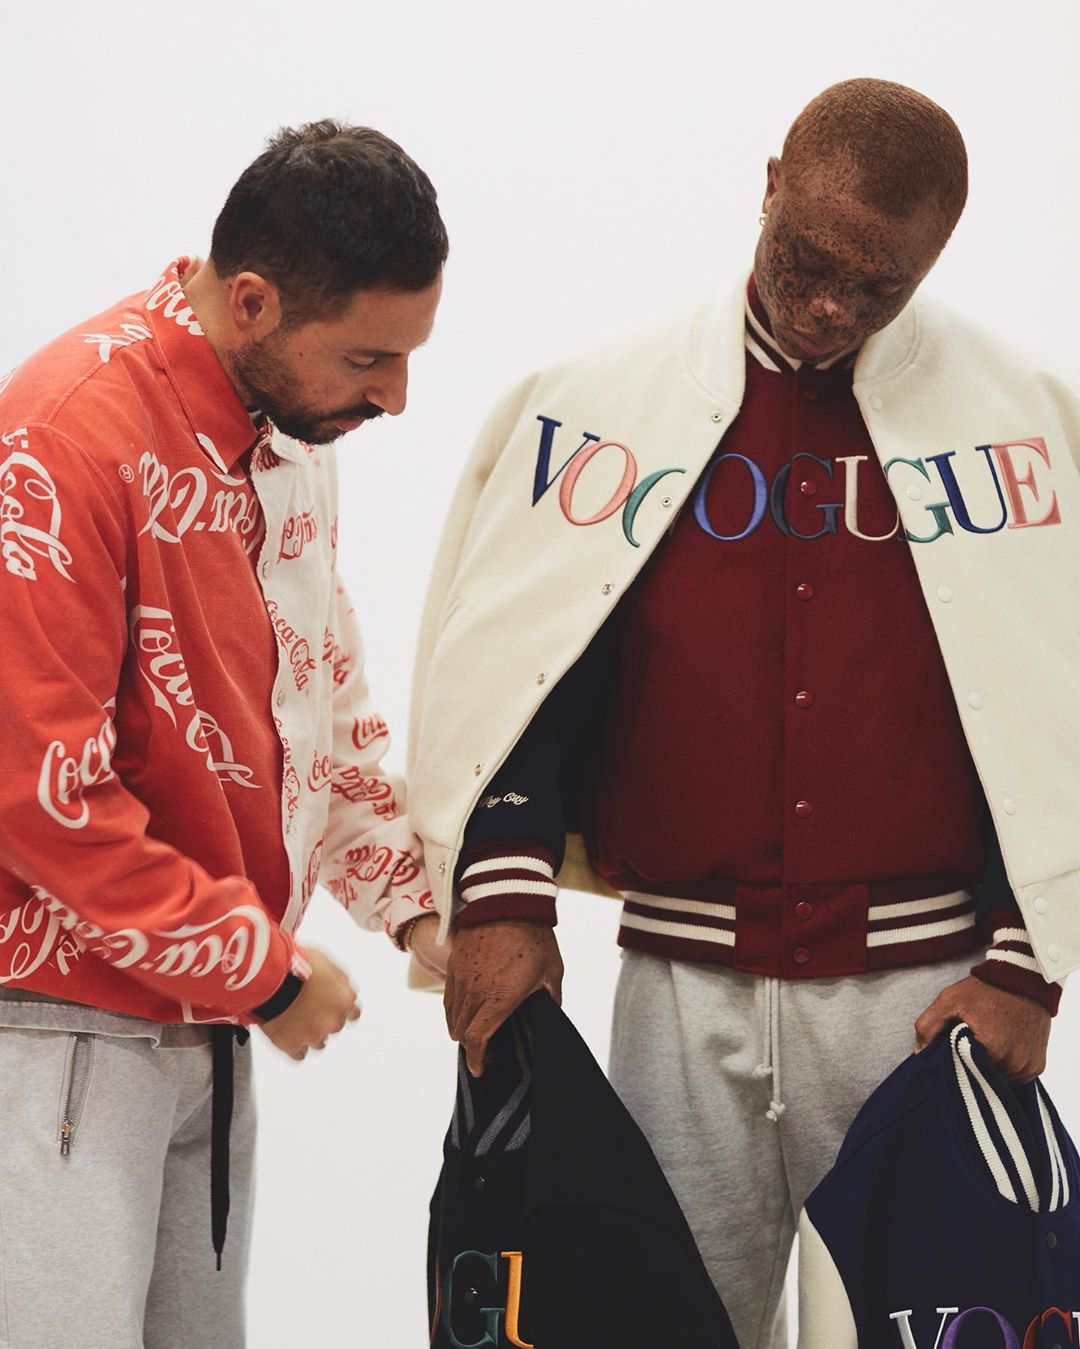 KITH X VOGUE X RUSSELL ATHLETIC X GOLDEN BEAR